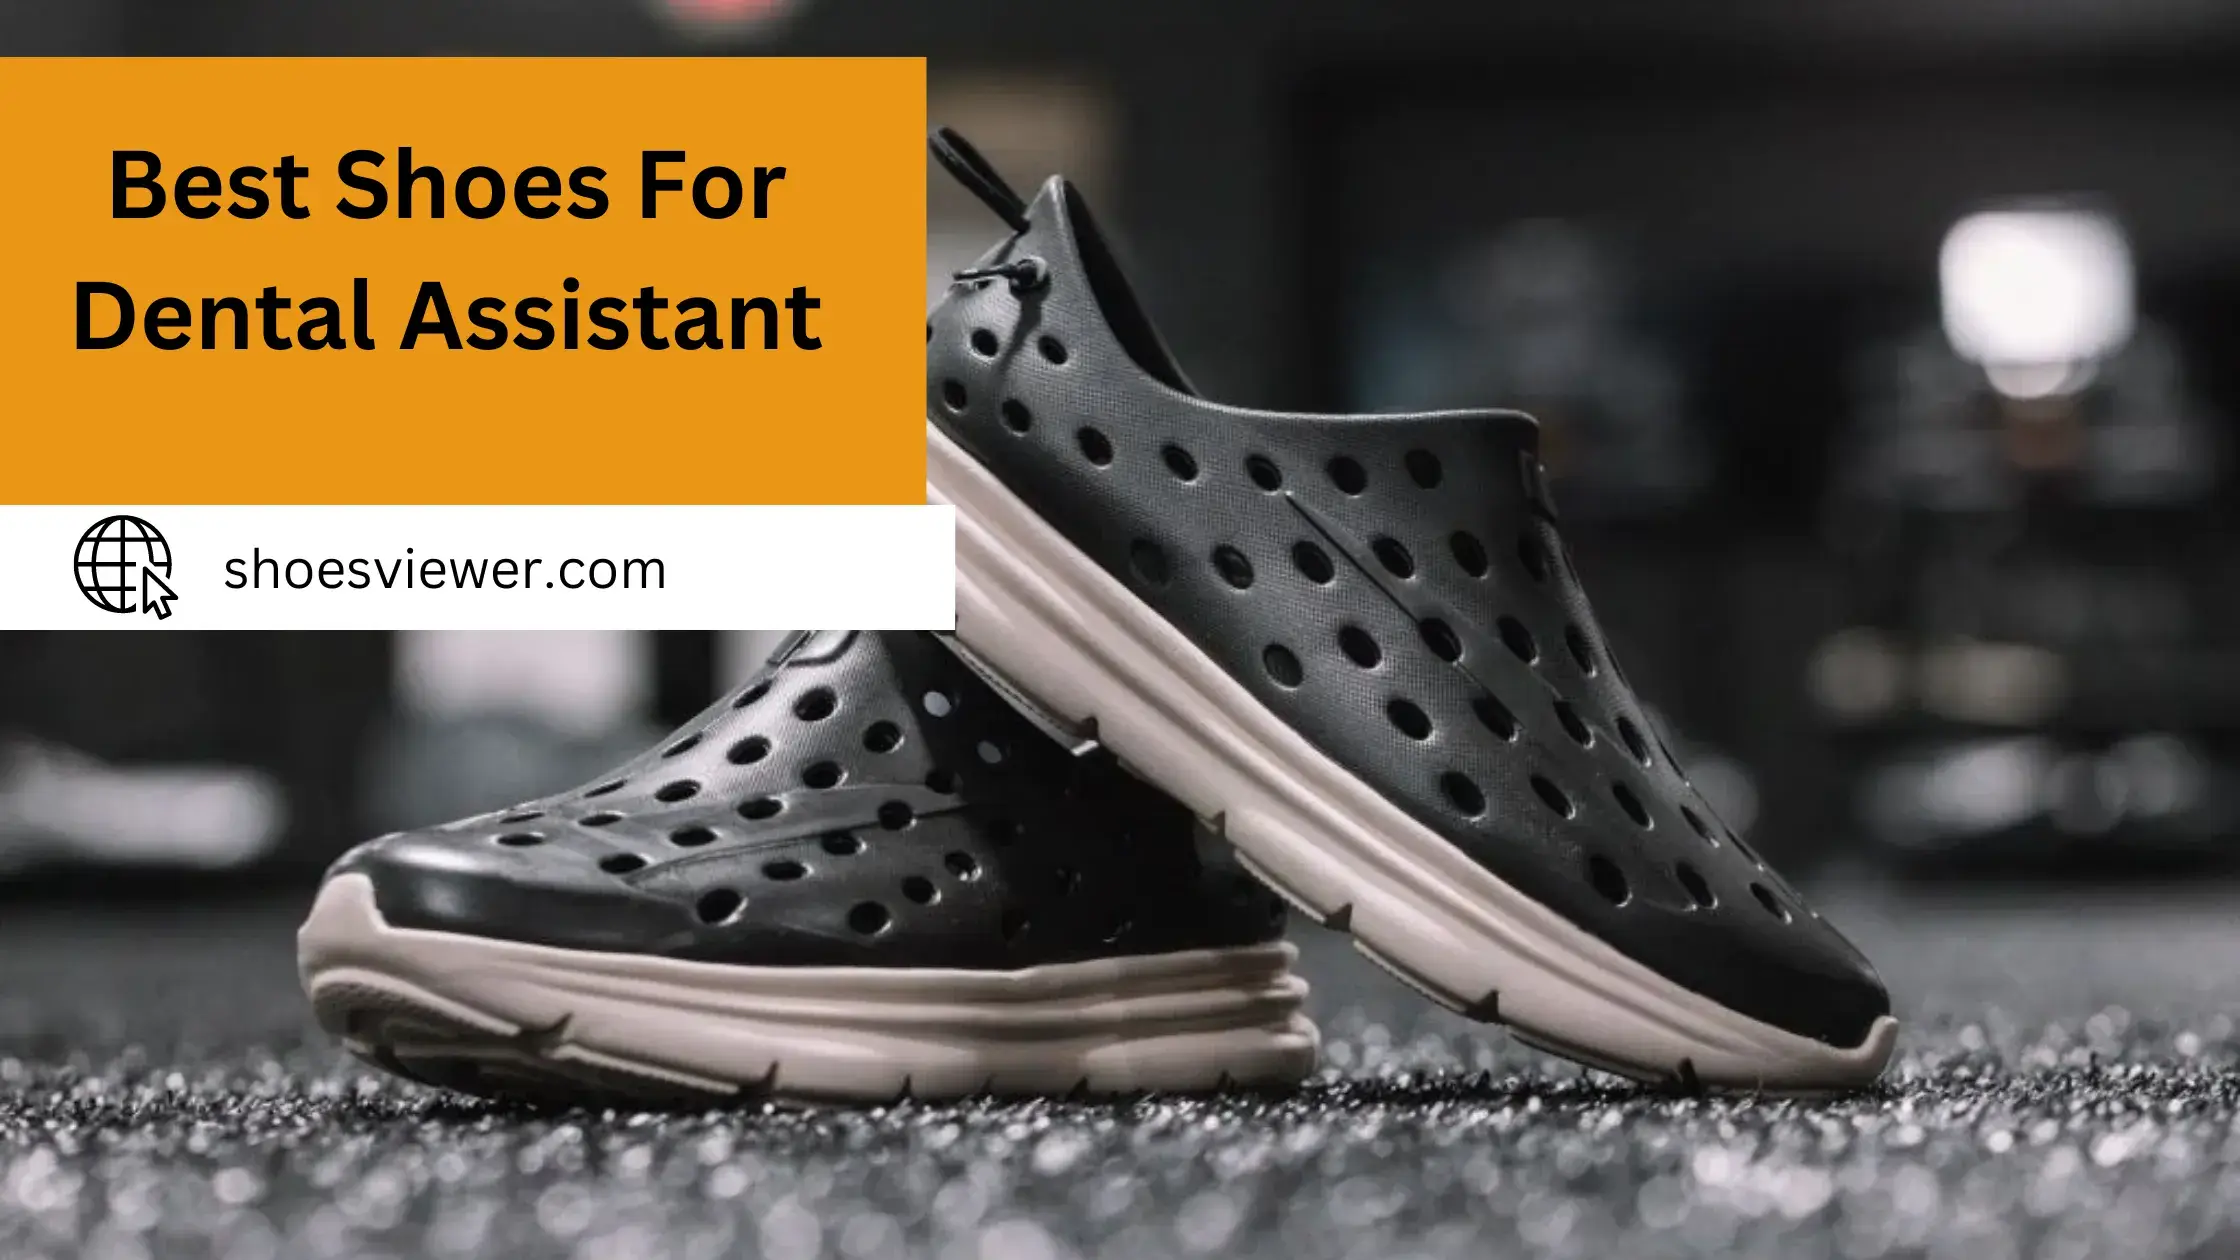 Best Shoes For Dental Assistant - A Comprehensive Guide